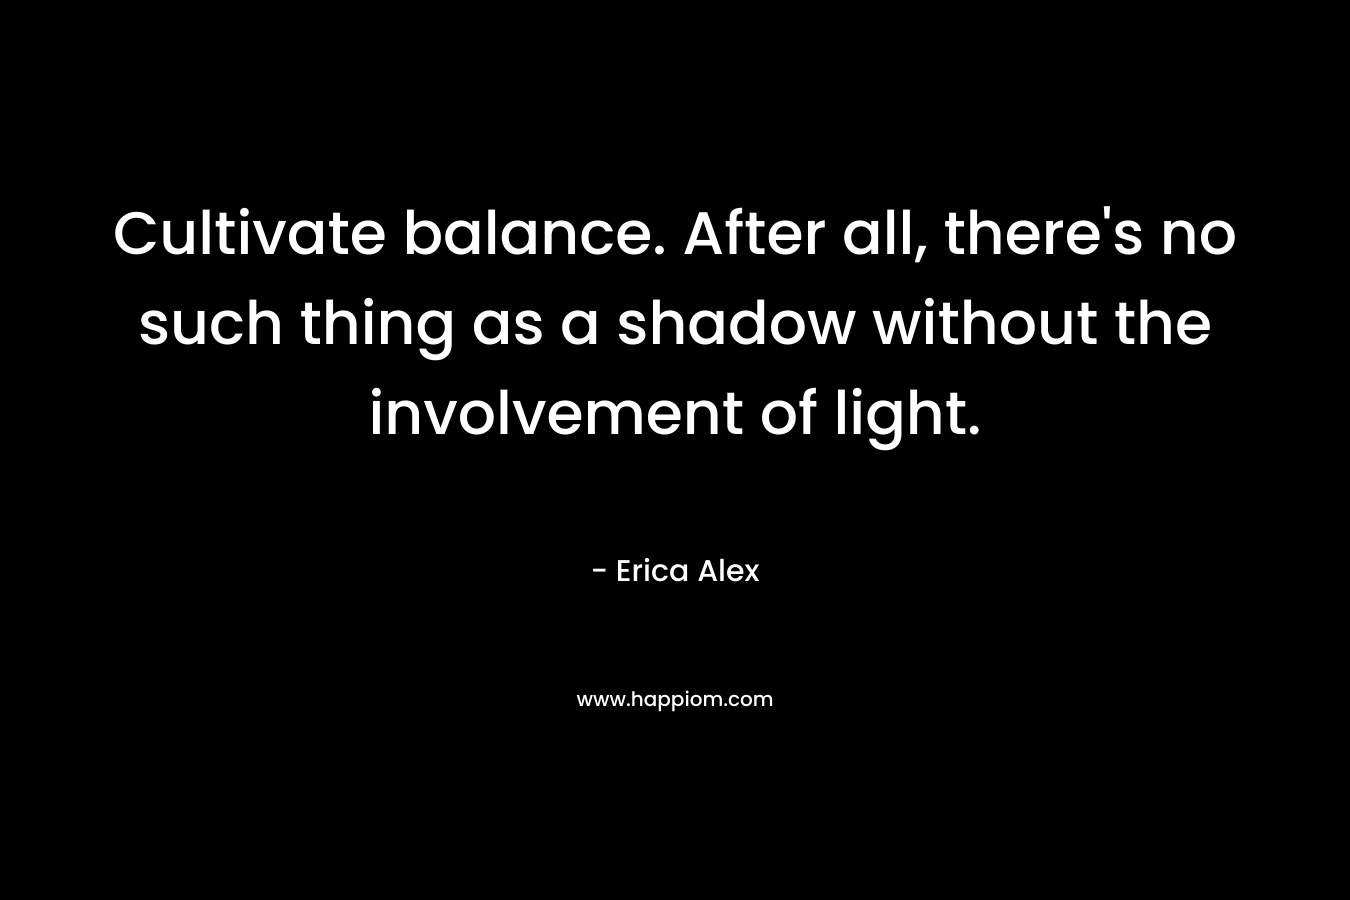 Cultivate balance. After all, there’s no such thing as a shadow without the involvement of light. – Erica Alex